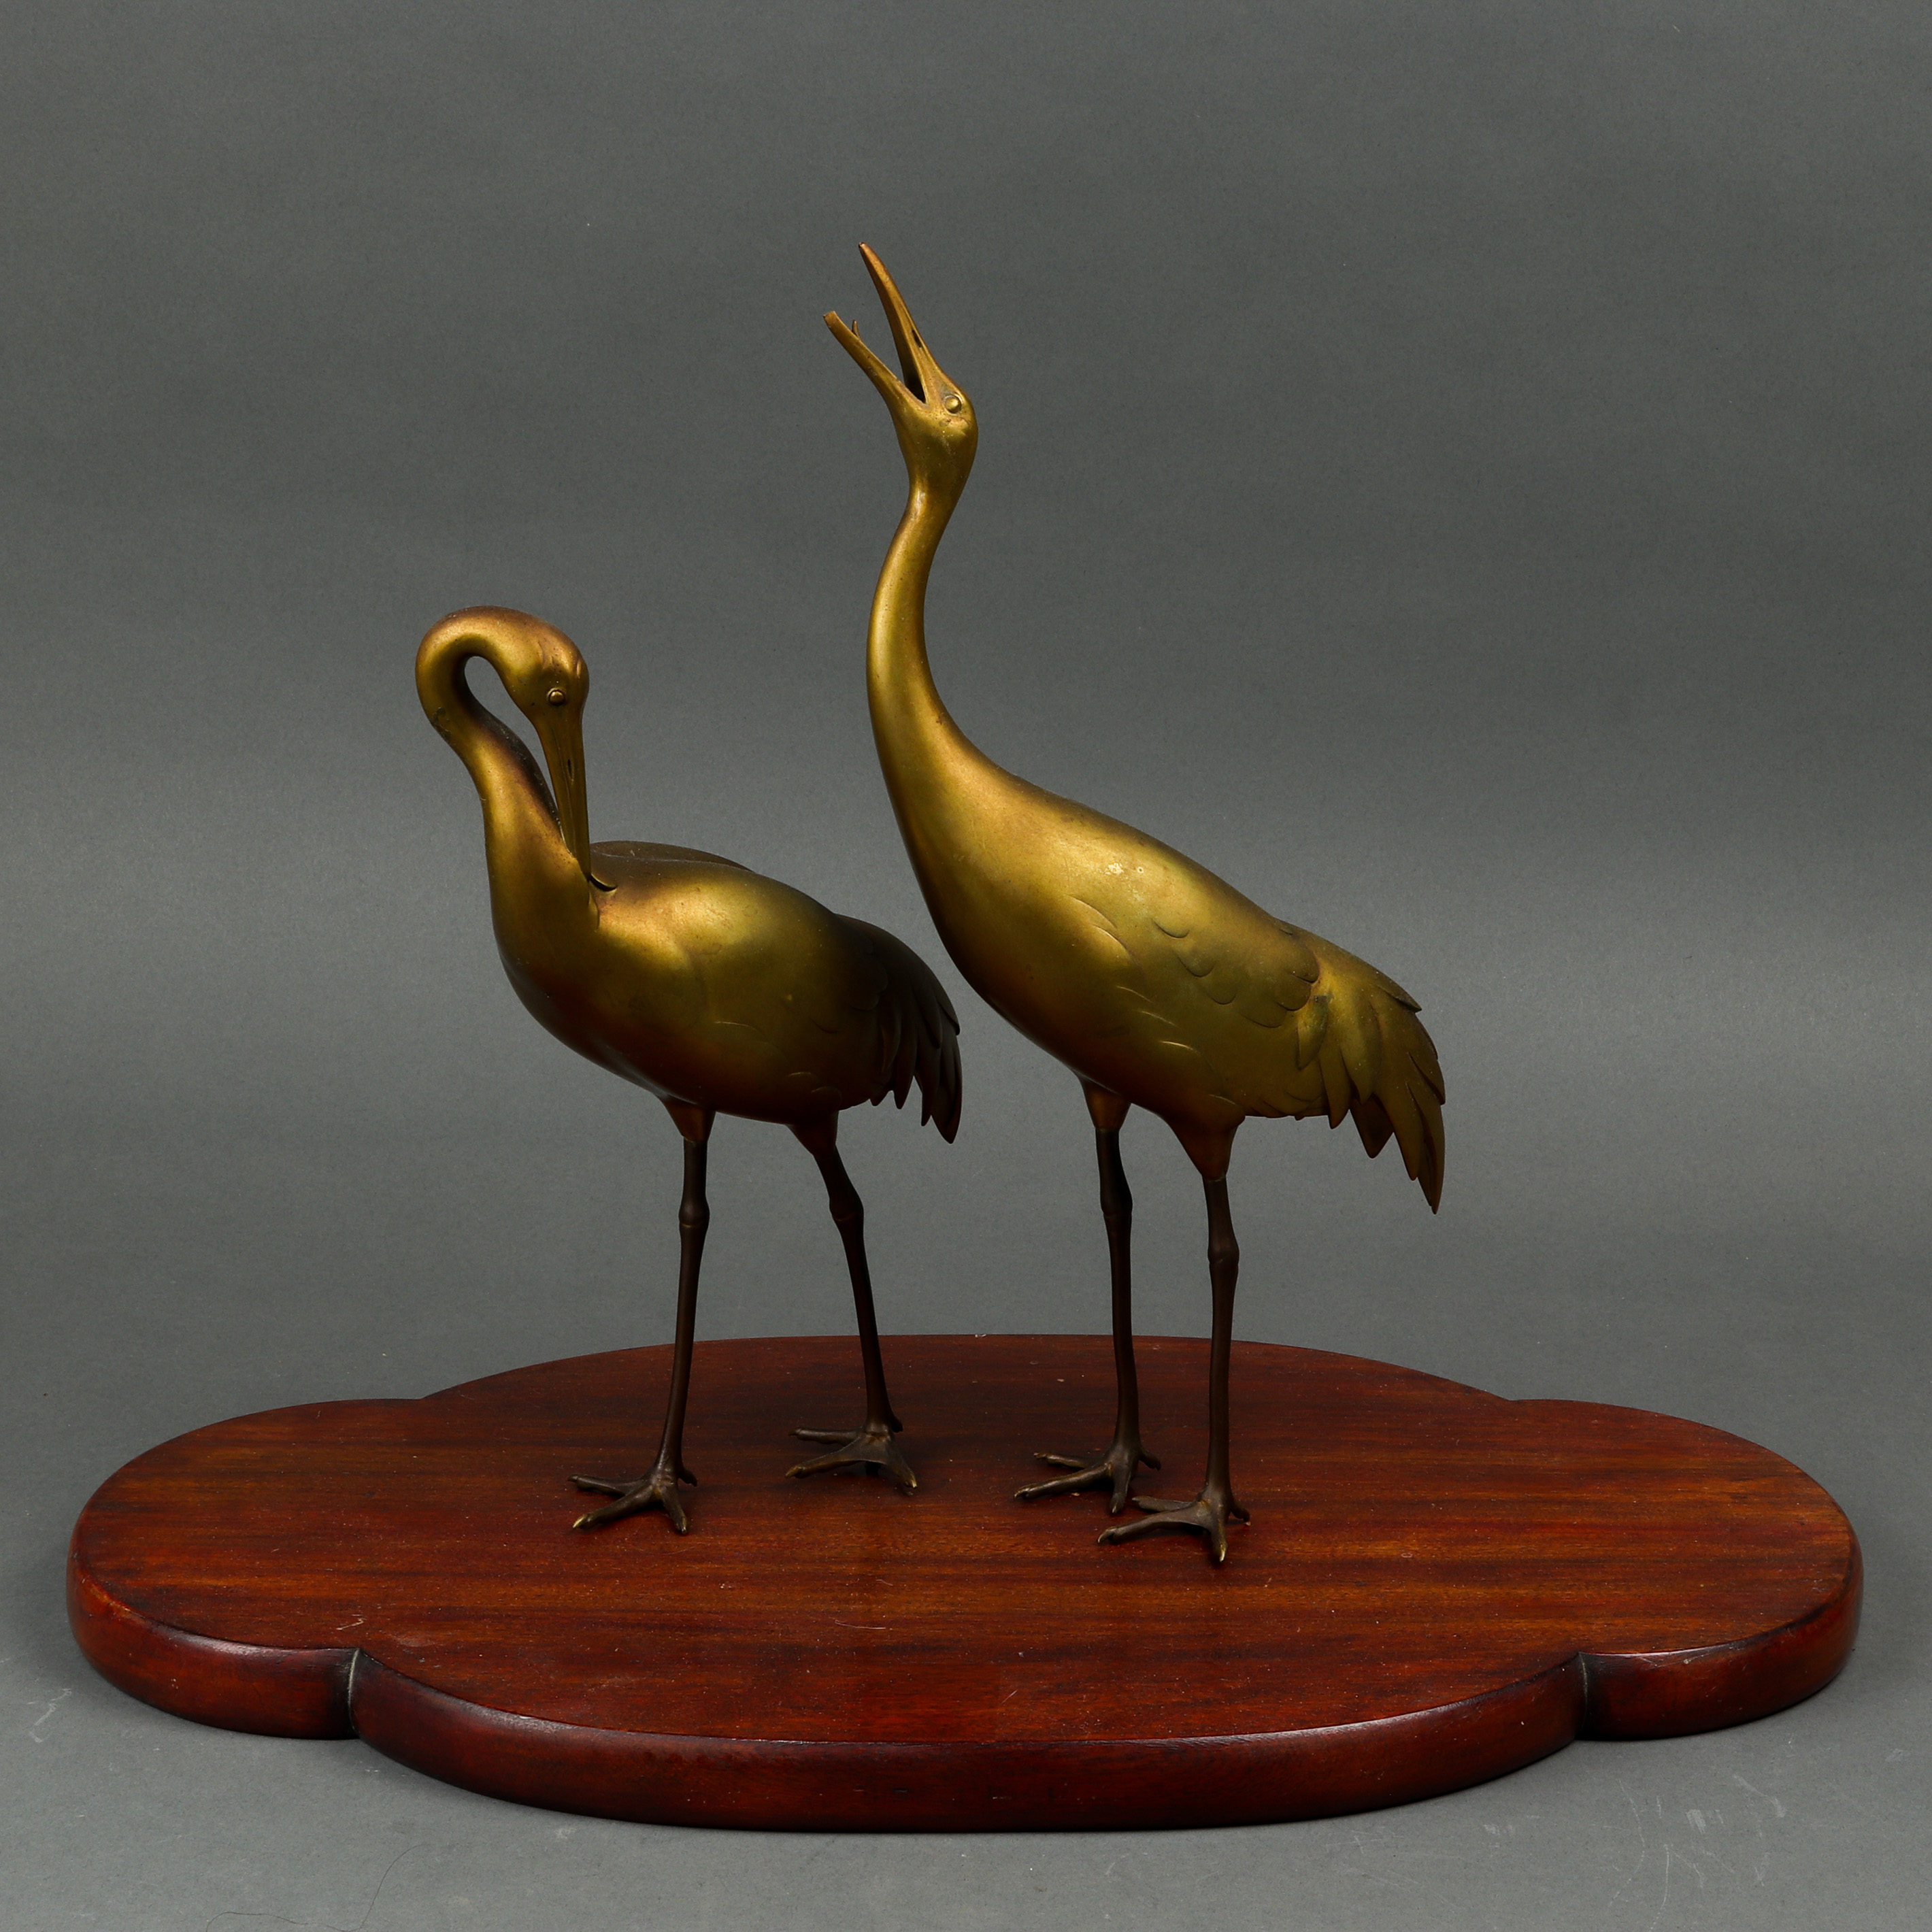  LOT OF 2 JAPANESE BRONZE CRANES 3a4ad2